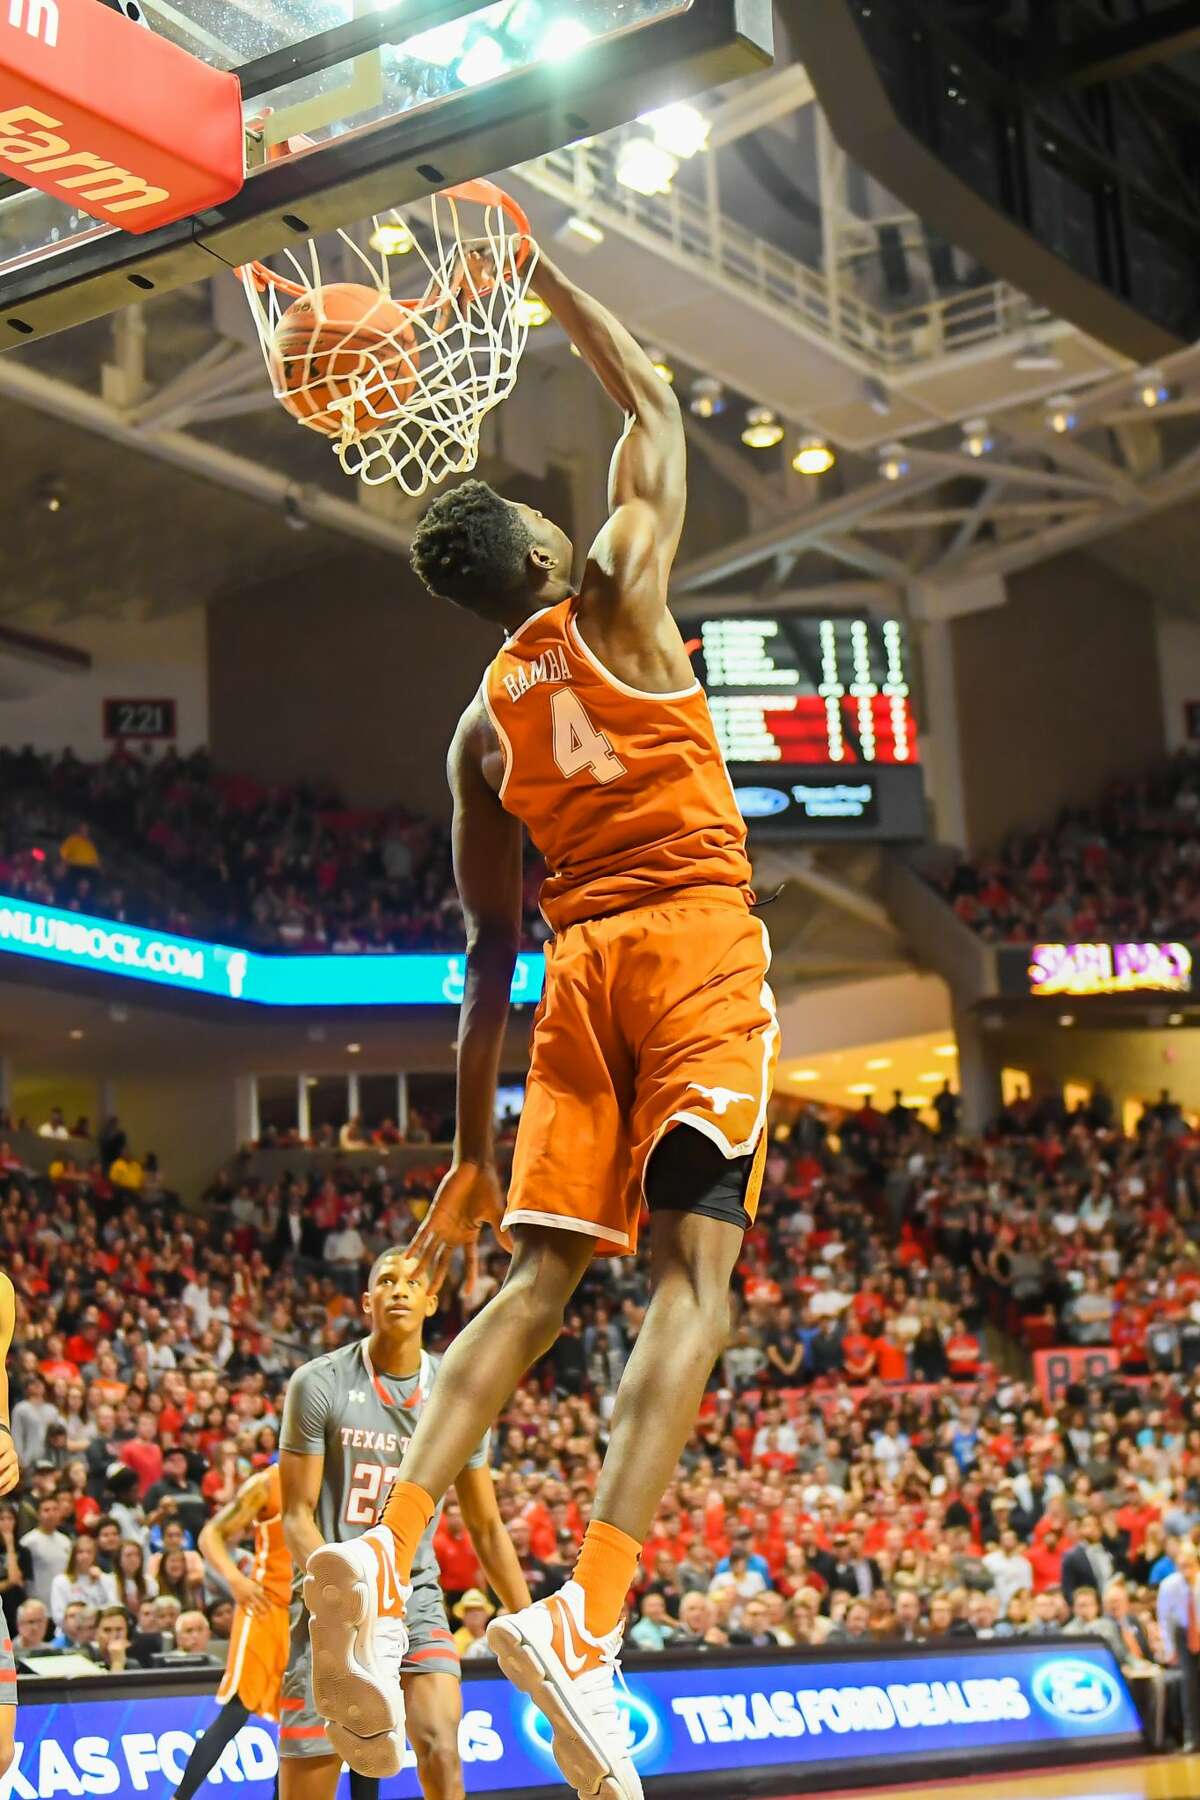 LUBBOCK, TX - JANUARY 31: Mohamed Bamba #4 of the Texas Longhorns dunks the basketball during the first half of the game against the Texas Tech Red Raiders on January 31, 2018 at United Supermarket Arena in Lubbock, Texas. (Photo by John Weast/Getty Images)